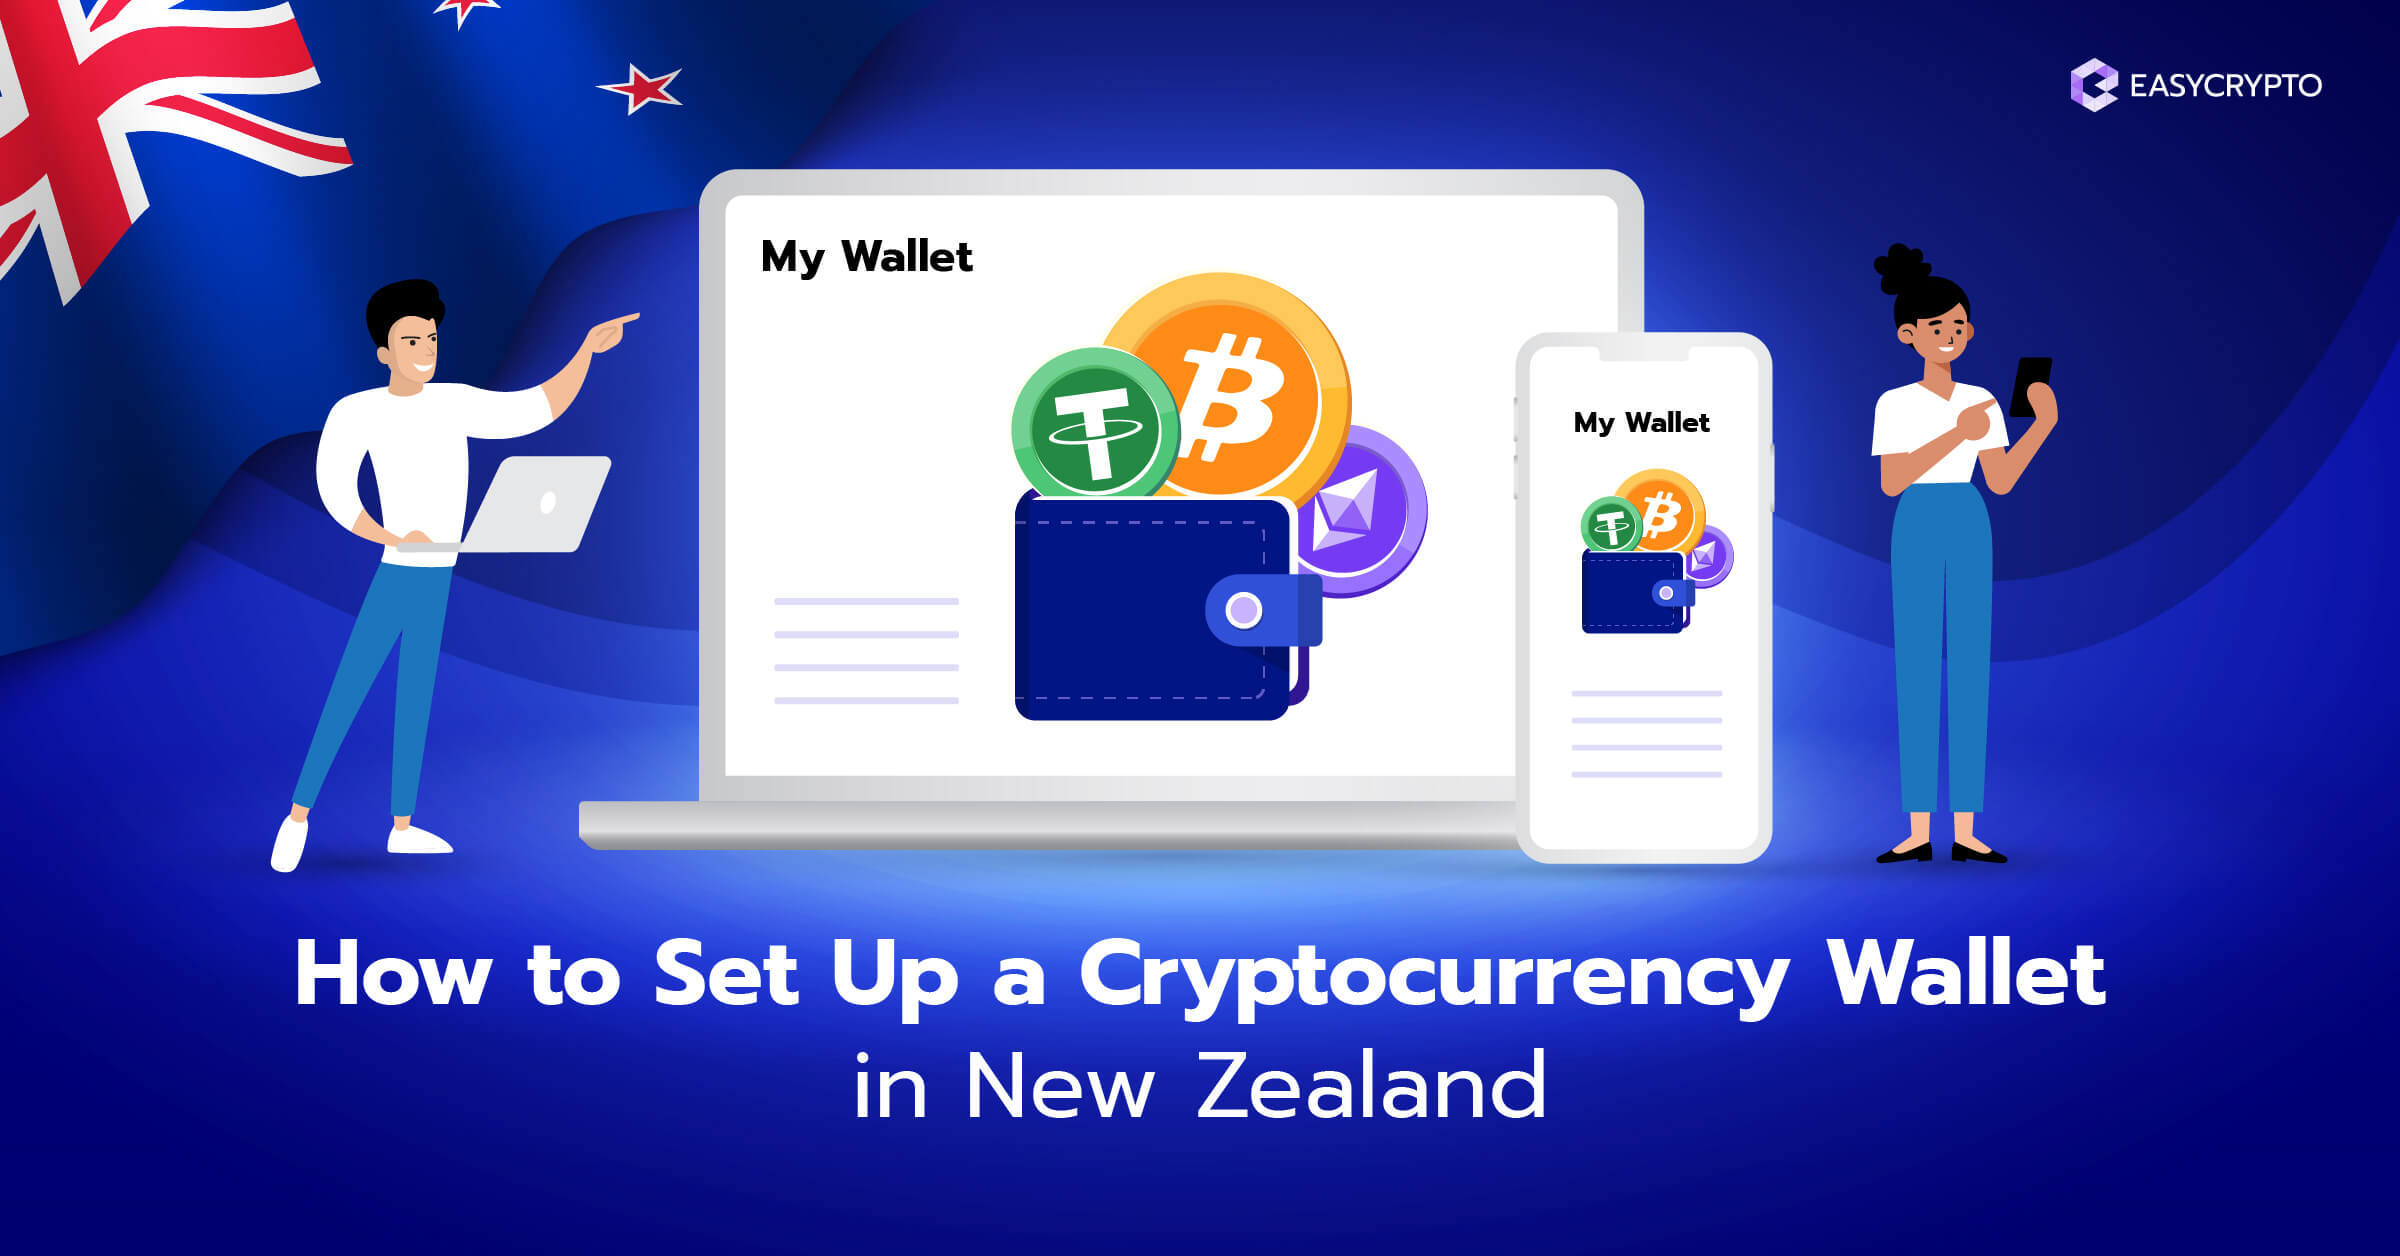 Cryptocurrency wallet nz best wallet to have litecoin and bitcoin